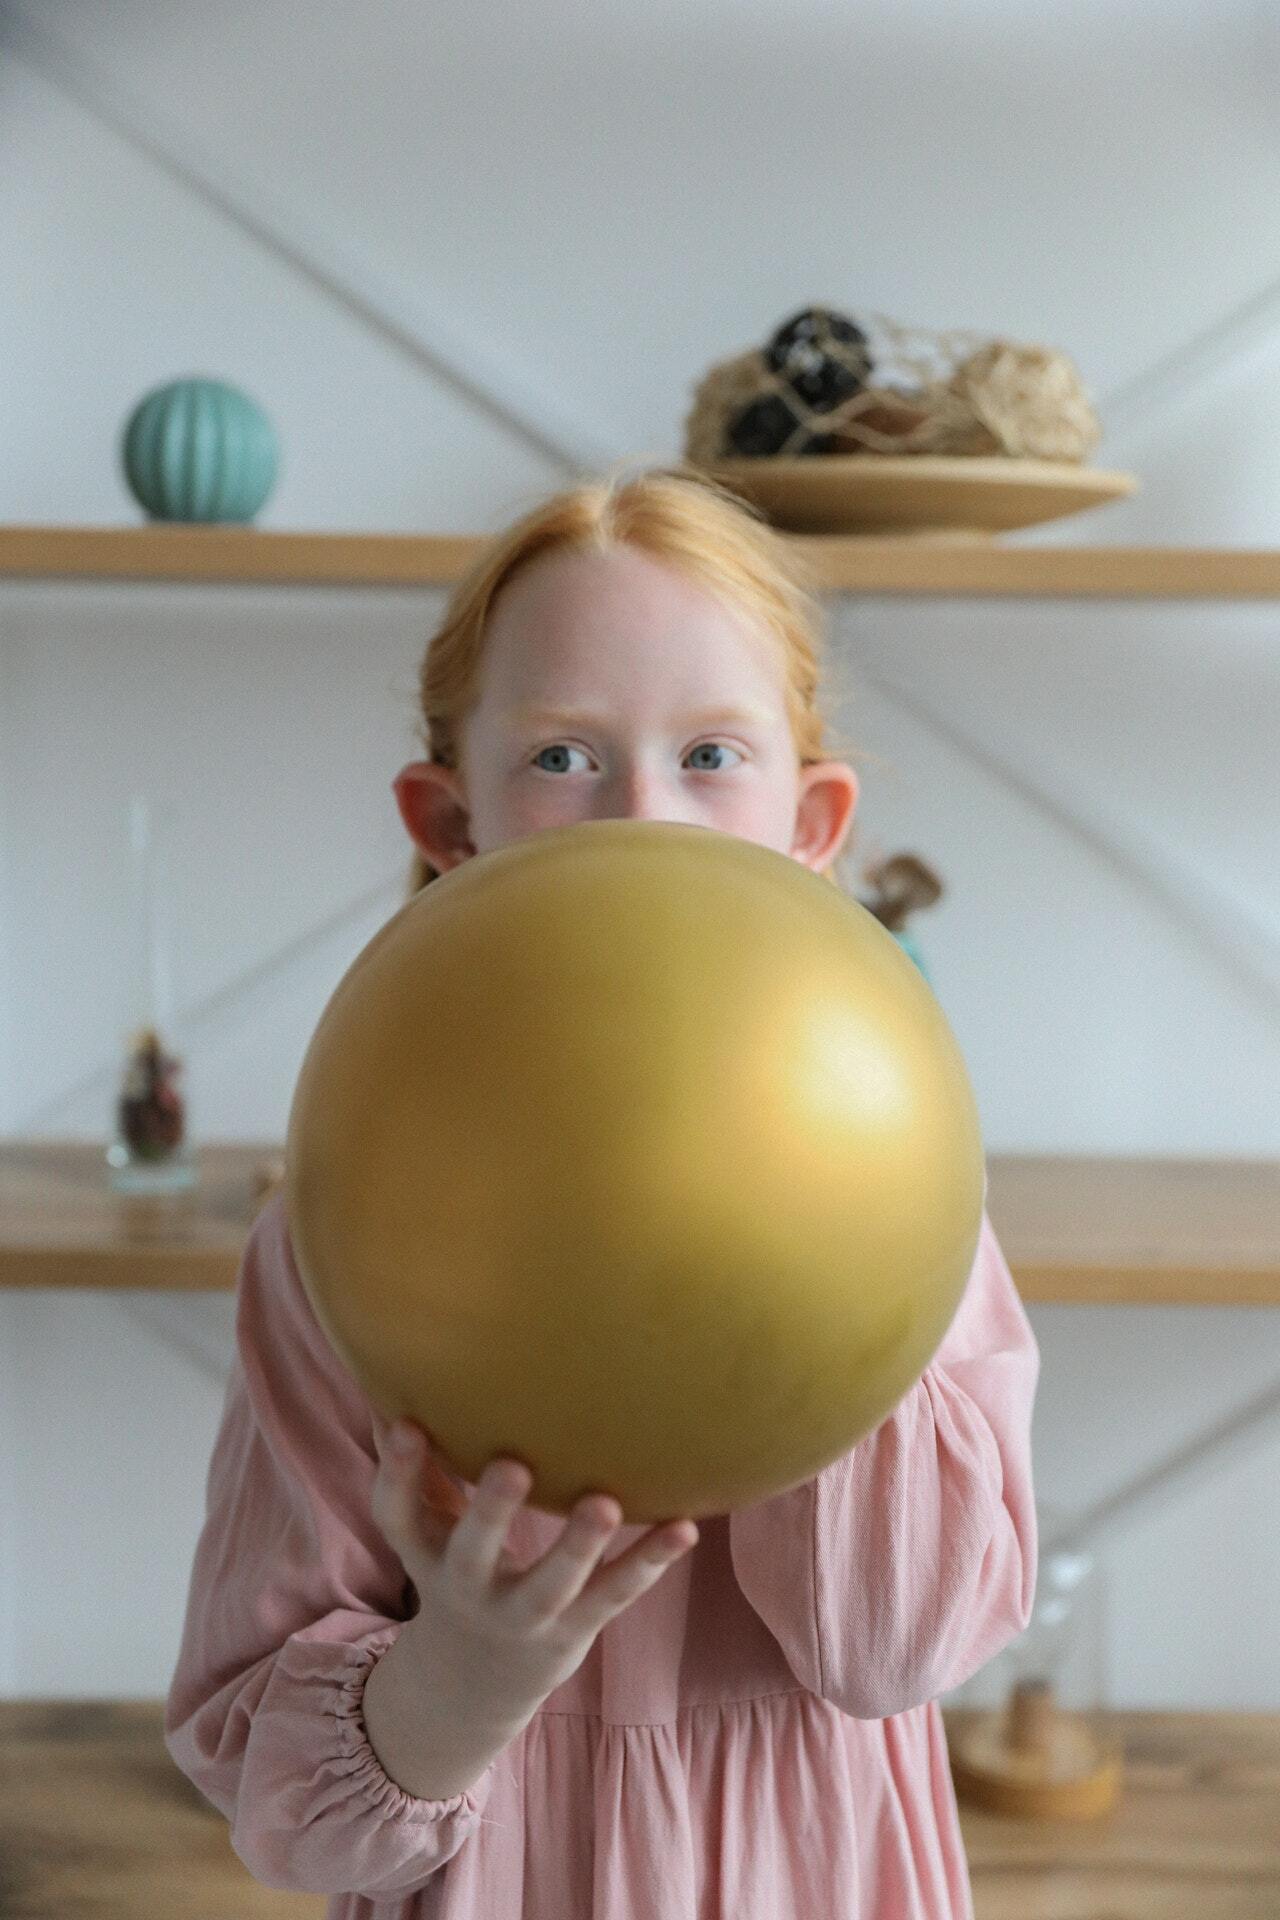 a child holding a large yellow apple